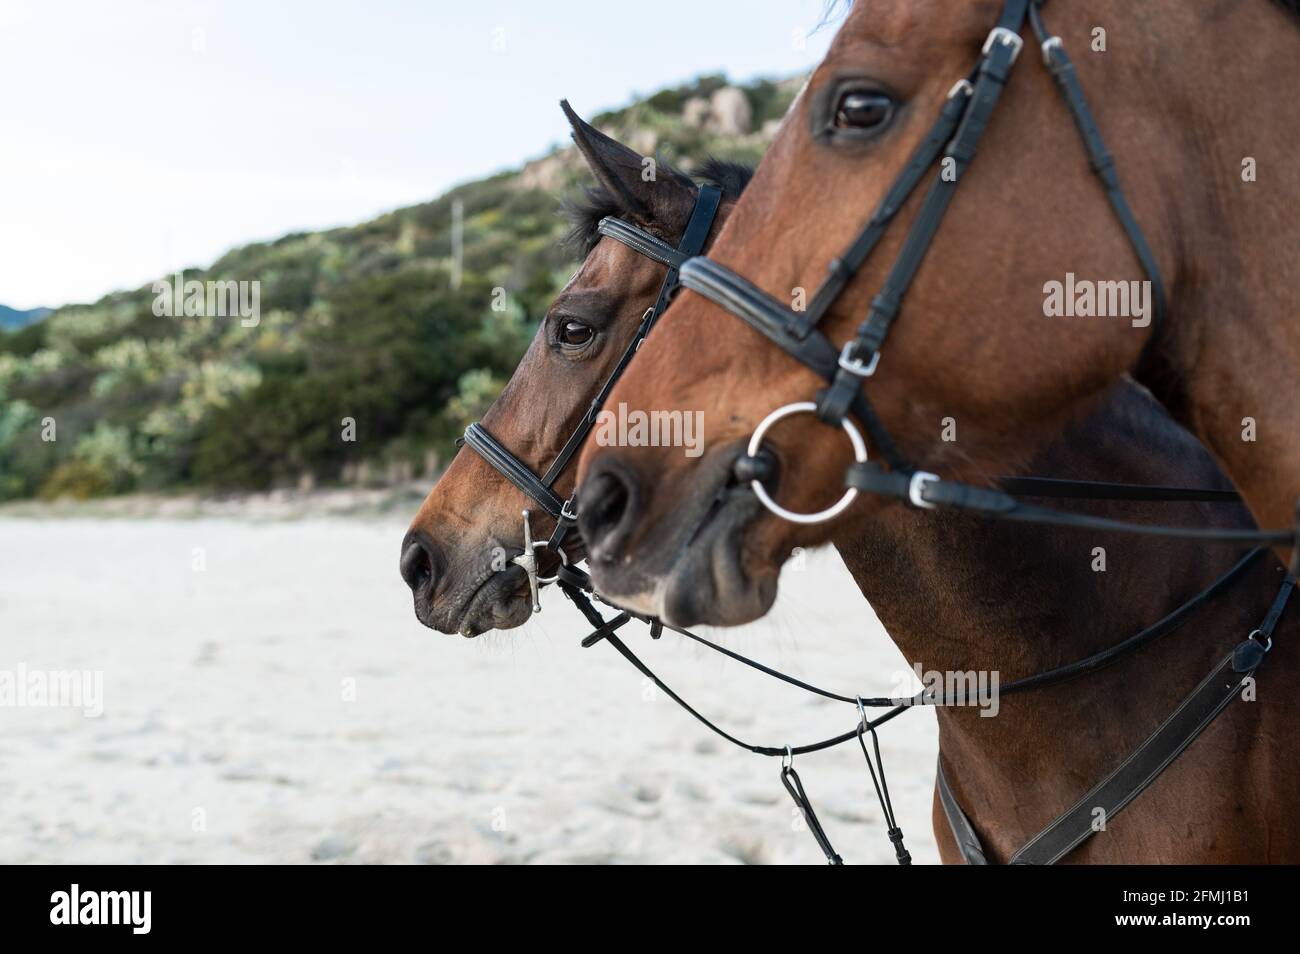 Muzzles of chestnut horses with reins against wavy ocean and green mount in daylight Stock Photo